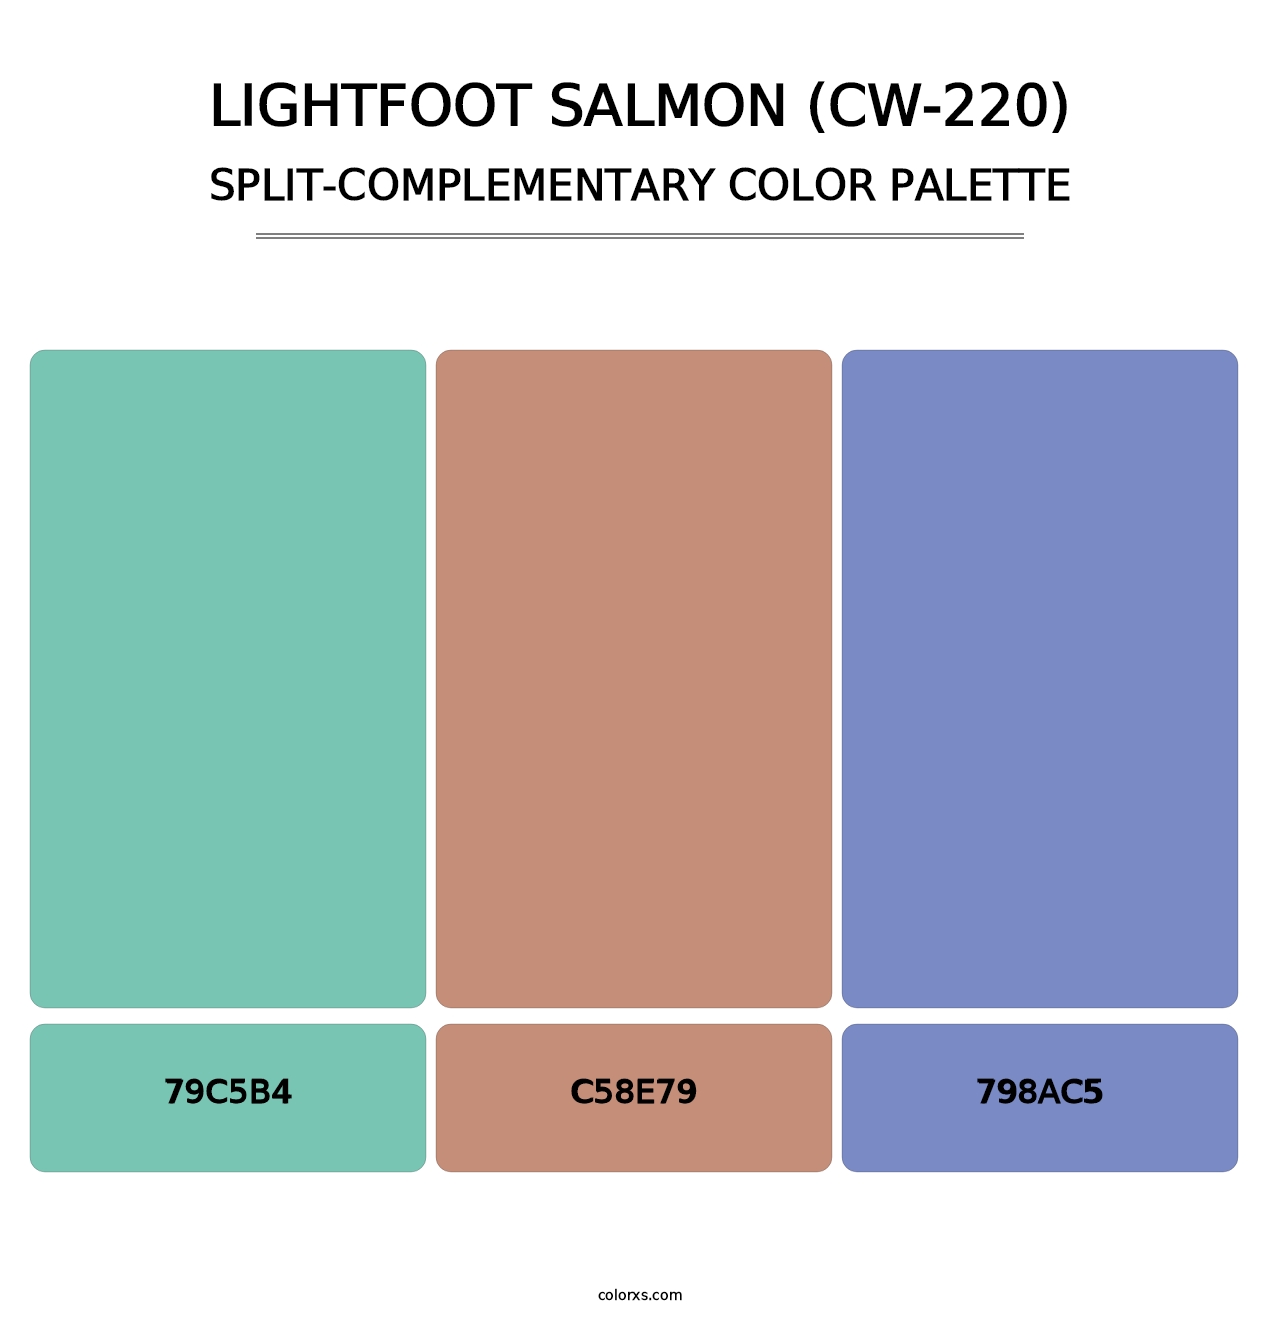 Lightfoot Salmon (CW-220) - Split-Complementary Color Palette